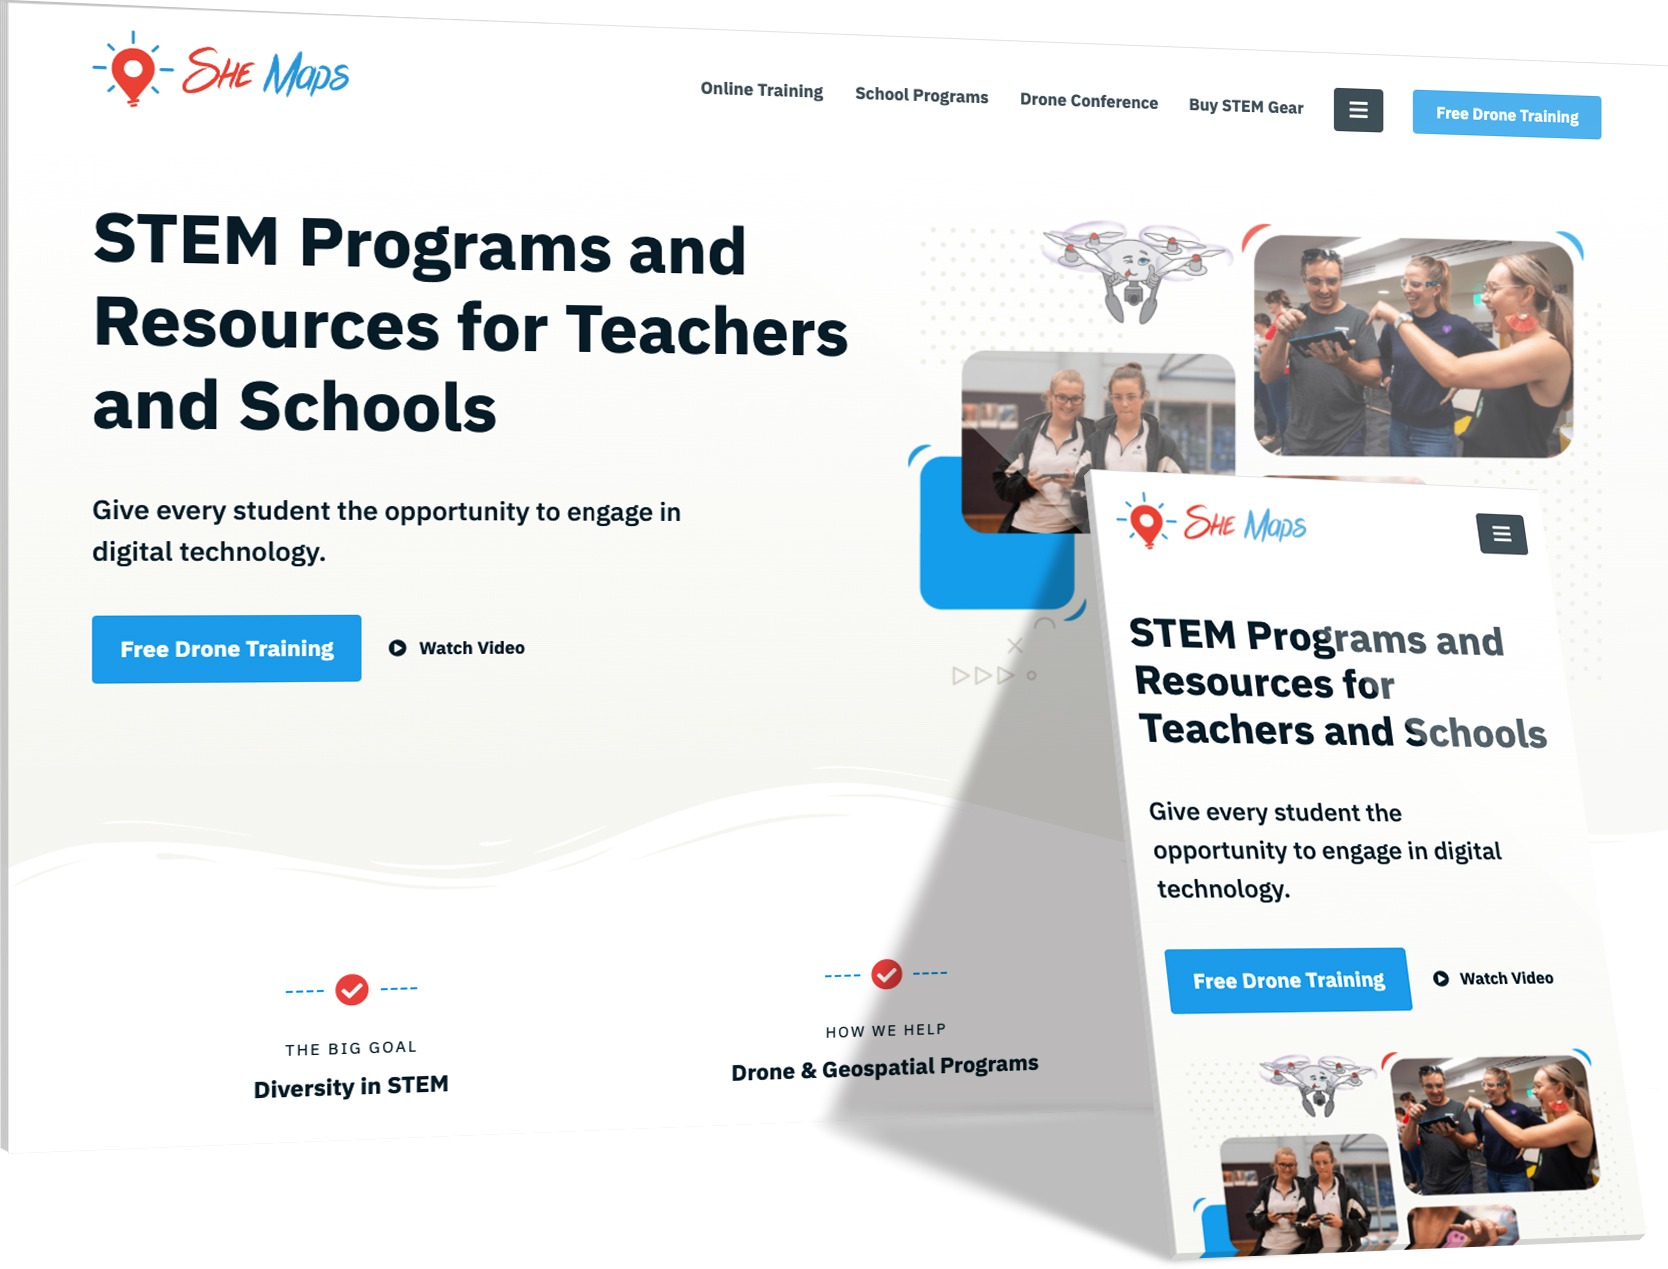 She Maps website screenshot featuring students learning STEM through drone technology, with "Free Drone Training" and "Watch Video" calls-to-action to provide engaging digital programs to schools.